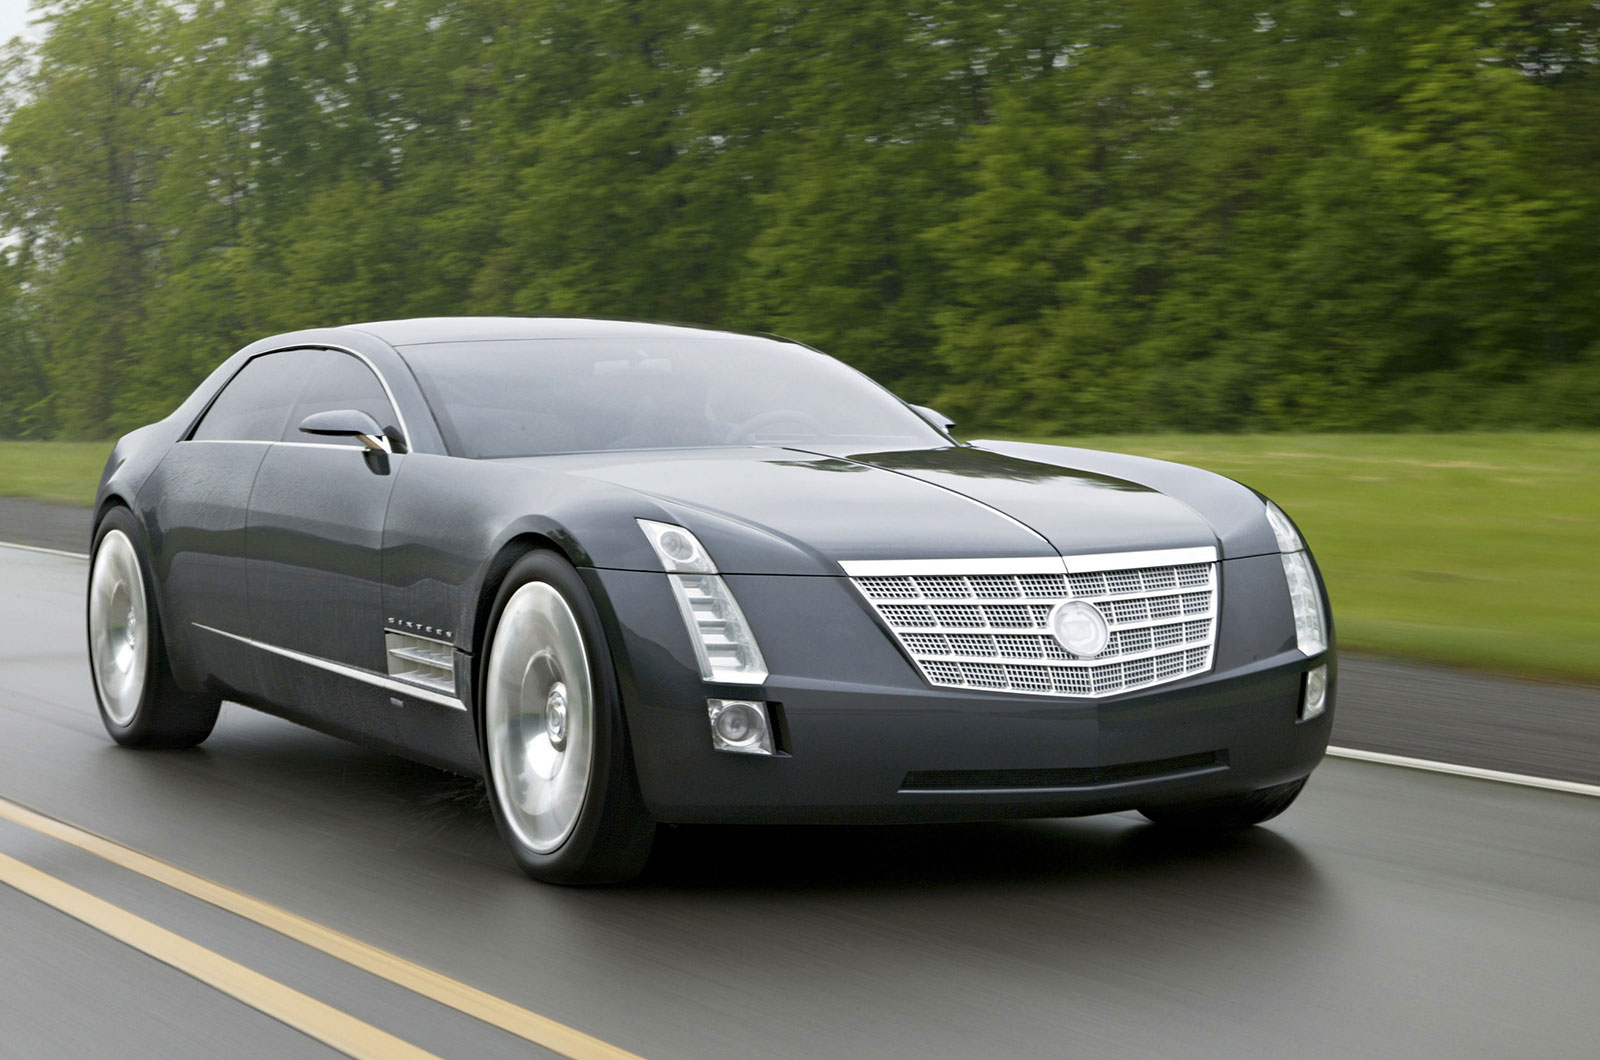 <p>GM has come up with some outlandish concepts over the years, but few can top the Cadillac Sixteen, with its 13.6-liter V16 that was reputedly good for 1000bhp. Nothing like it was ever going to enter production, but it did introduce a new design language for Cadillac, elements of which can still be seen on its production cars today.</p>